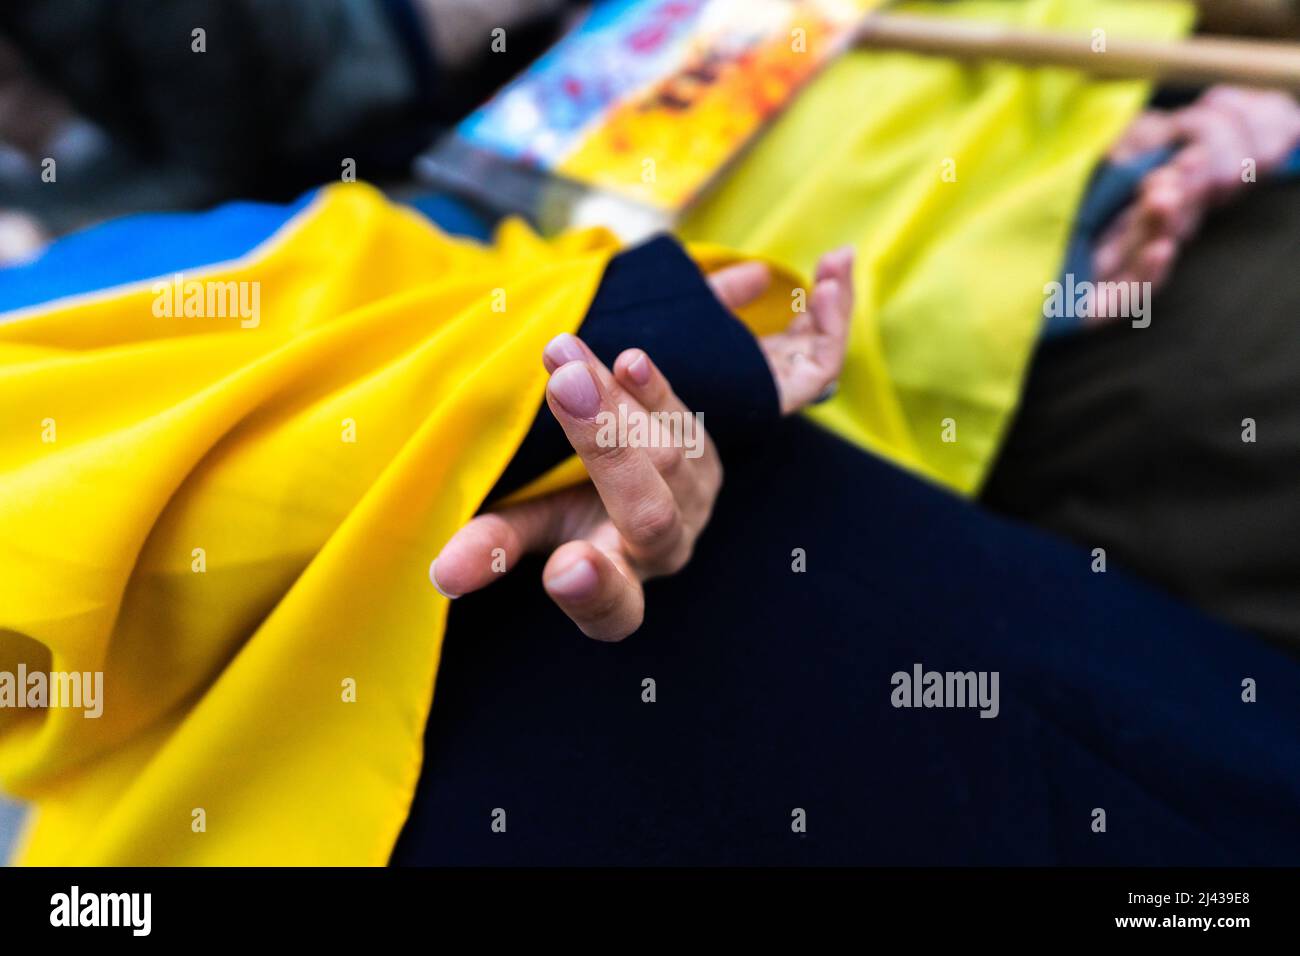 Evening, 7th April. Protesters tied up their hands near the Russian Embassy of London, to reenact the horror inflicted by the Russian Army. Stock Photo